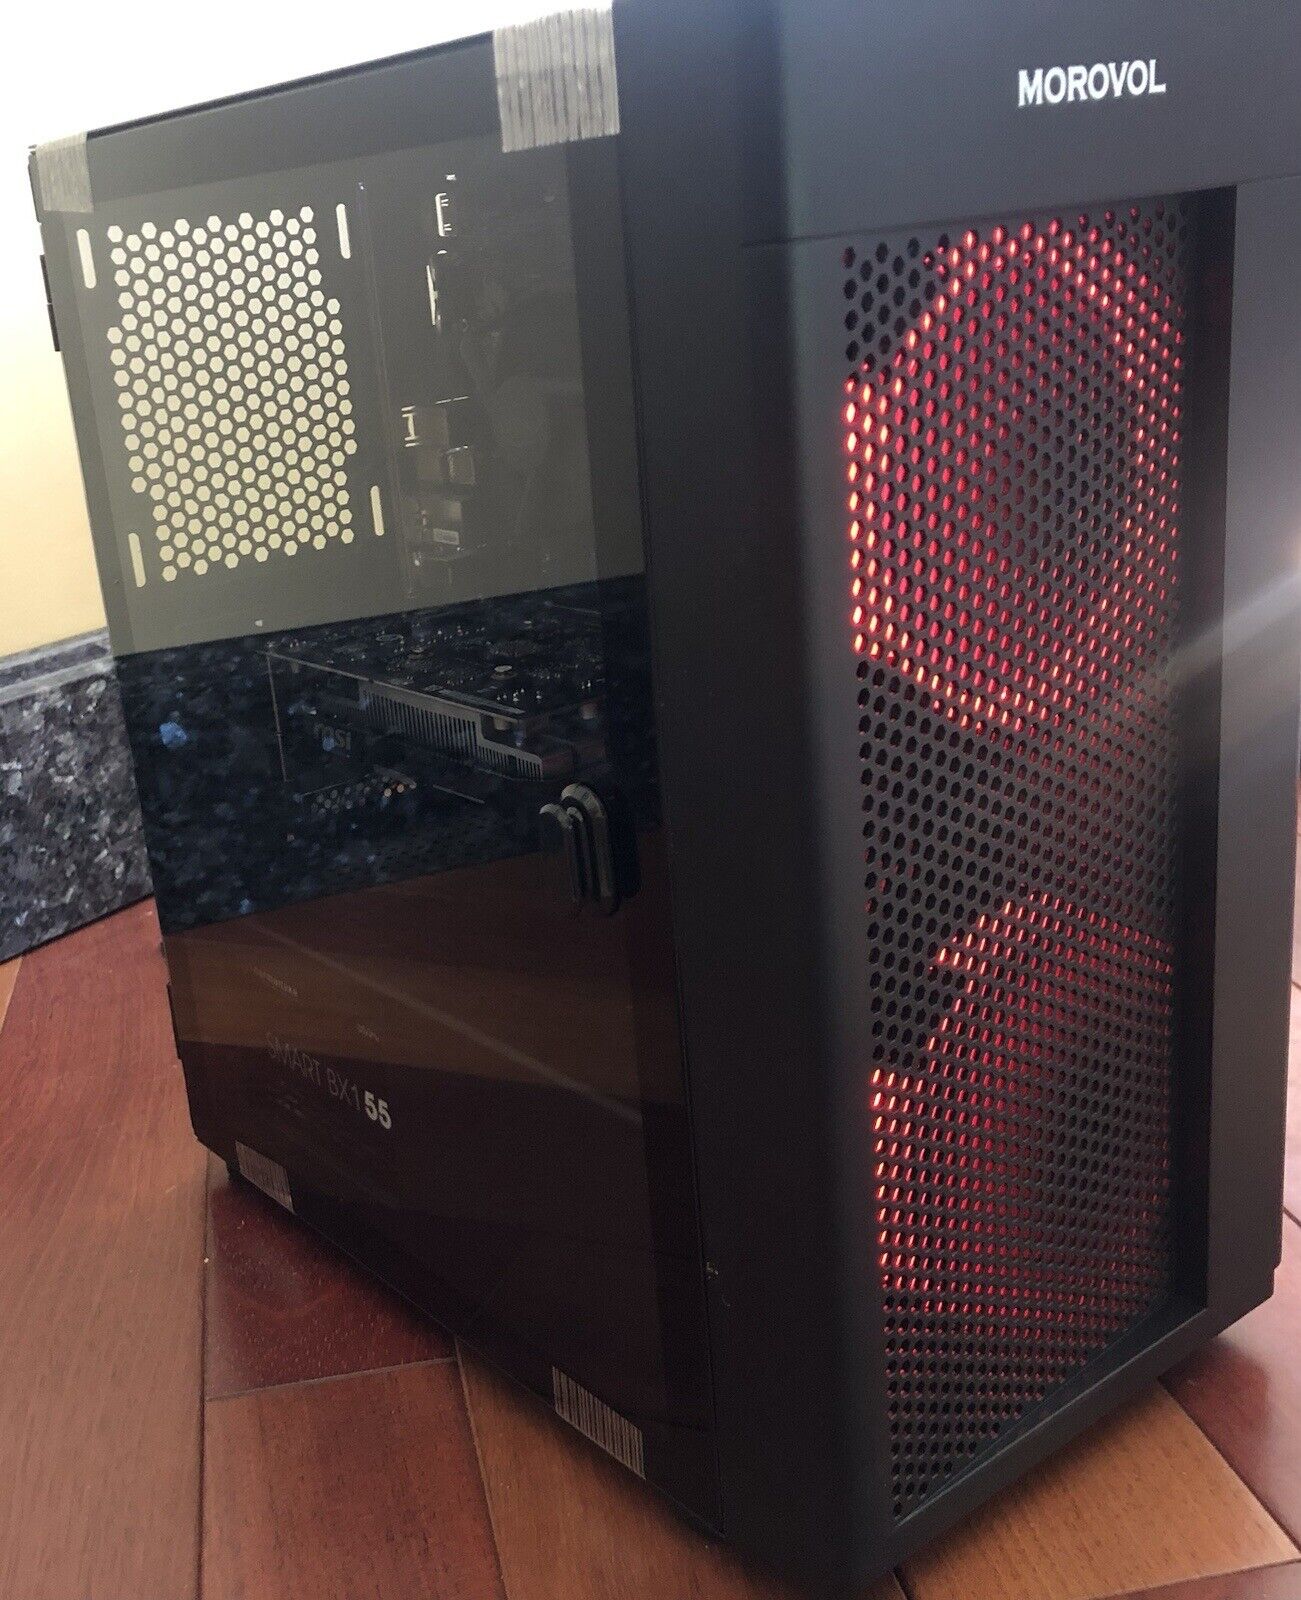 Brand new custom built gaming PC with Windows 11 home installed and with m.2 ssd